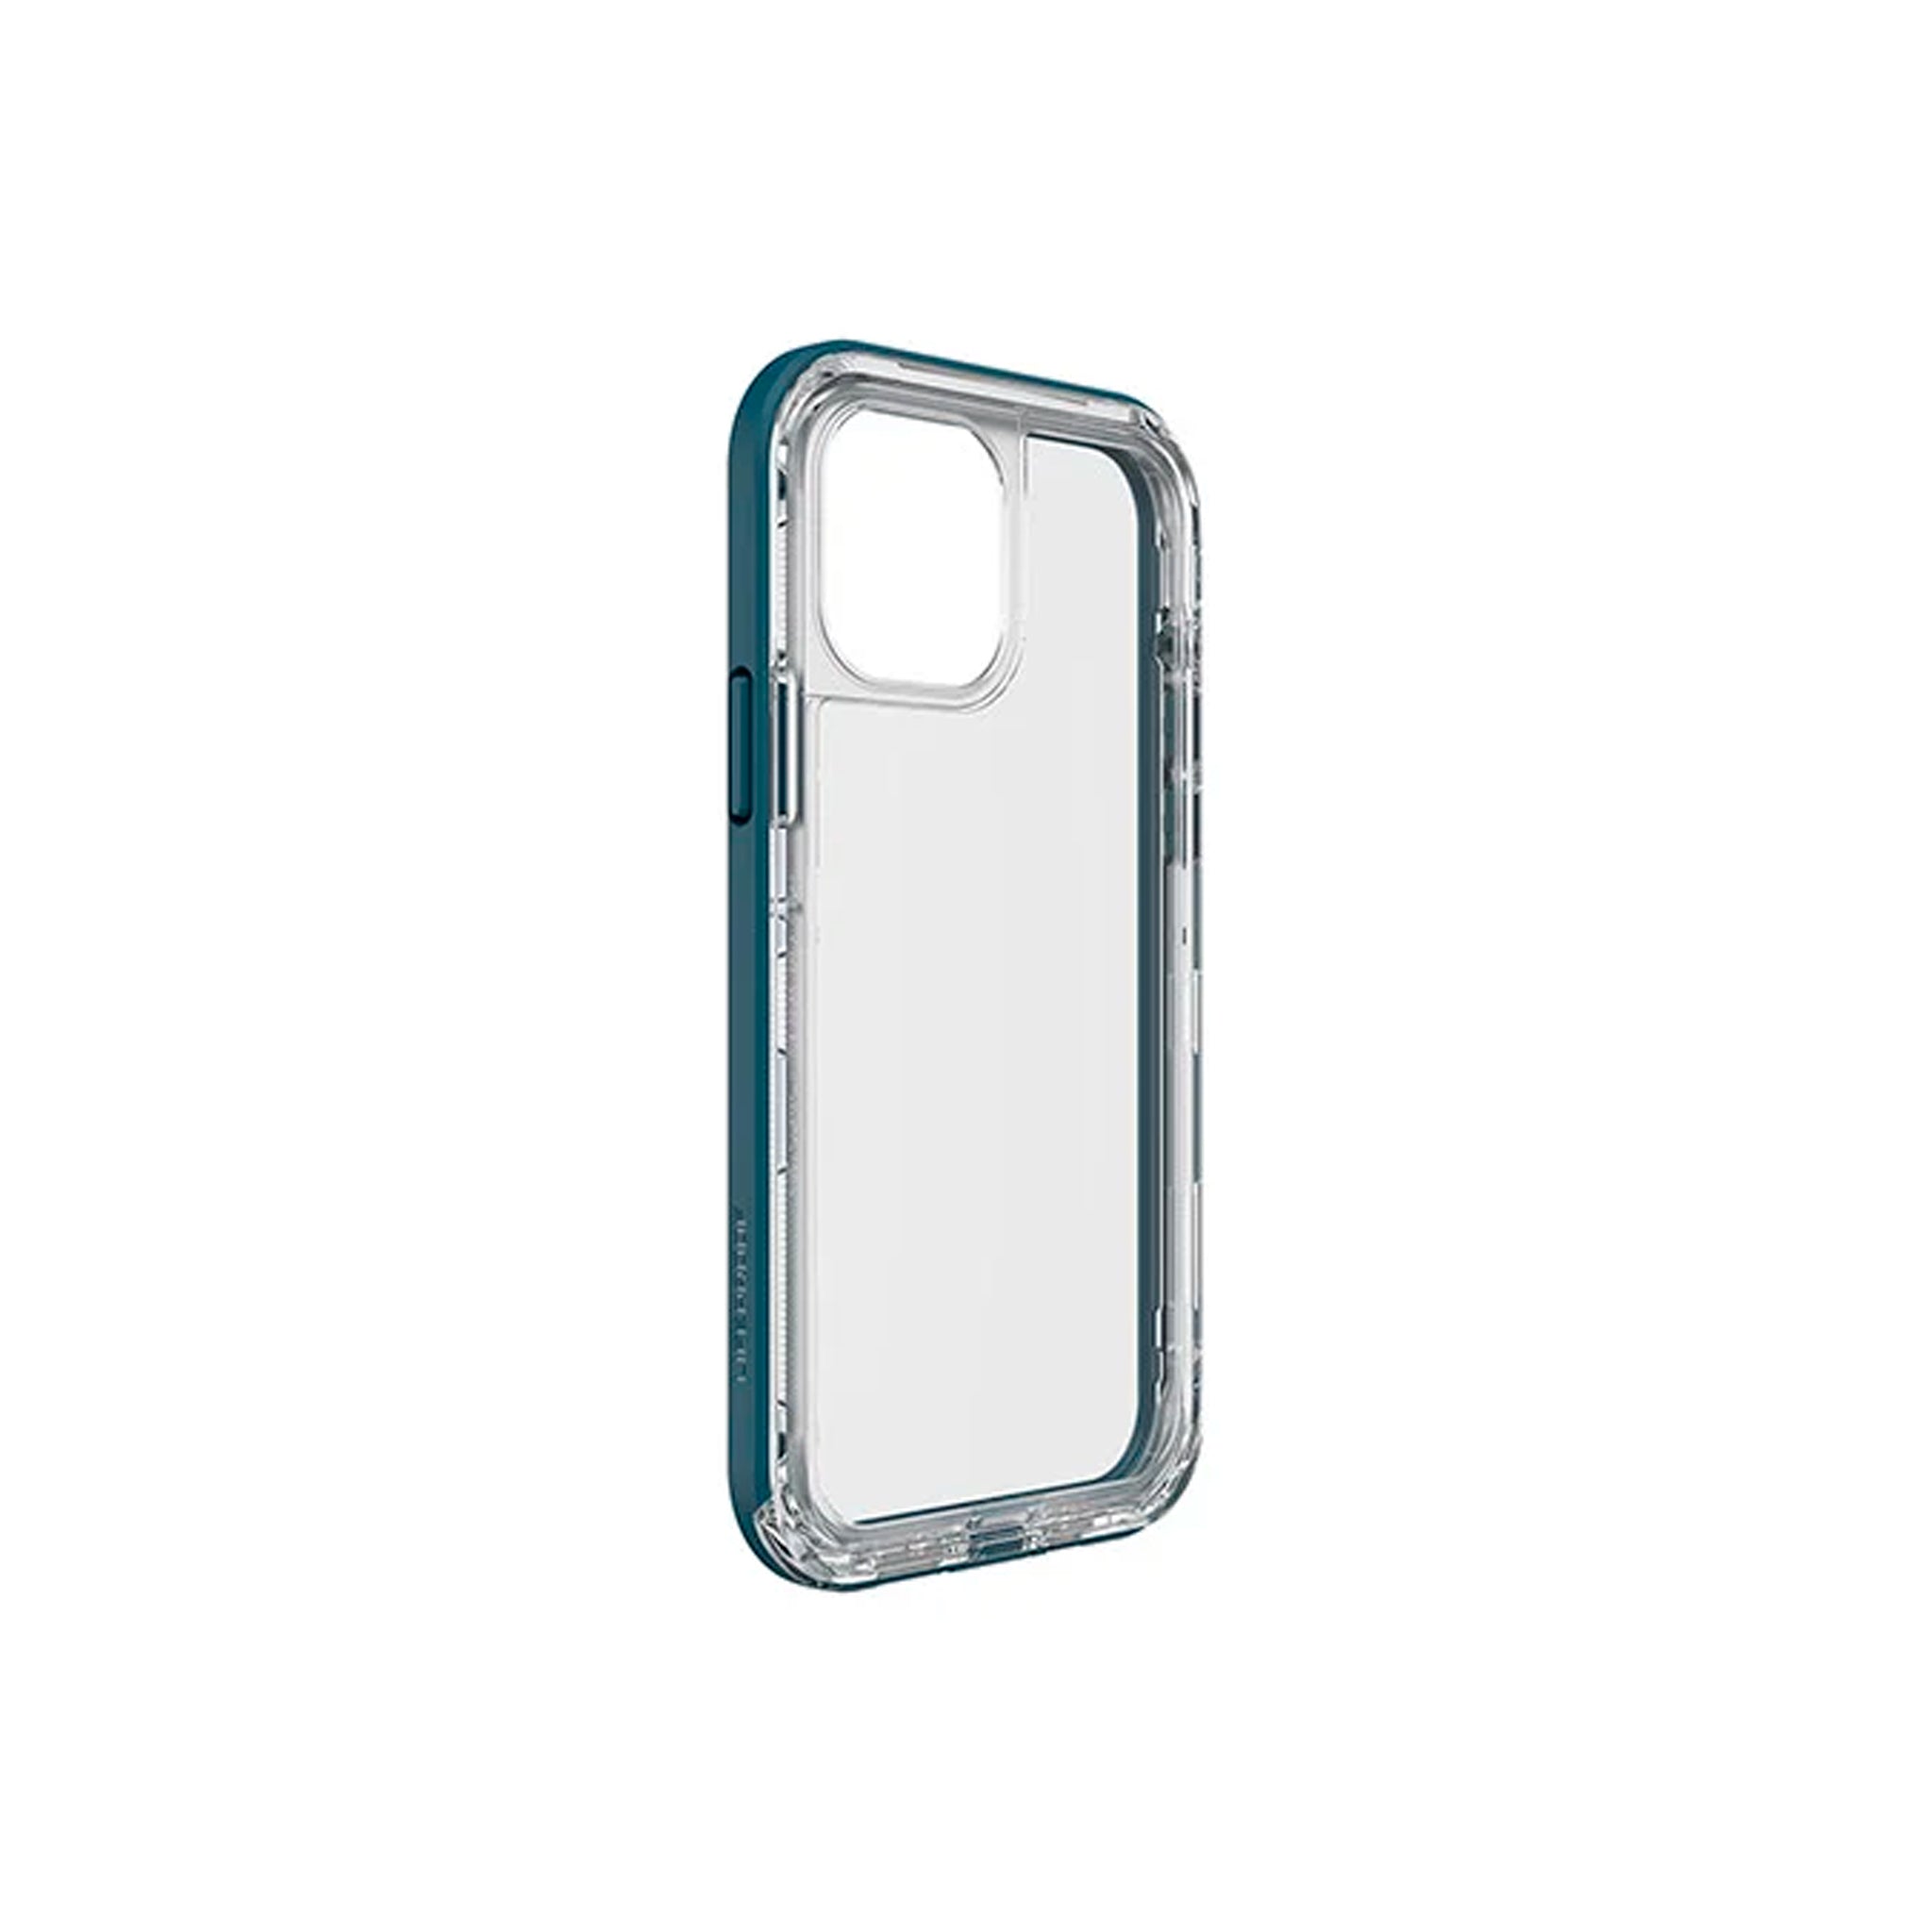 LifeProof - Next for iPhone 12 / 12 Pro - Clear Lake